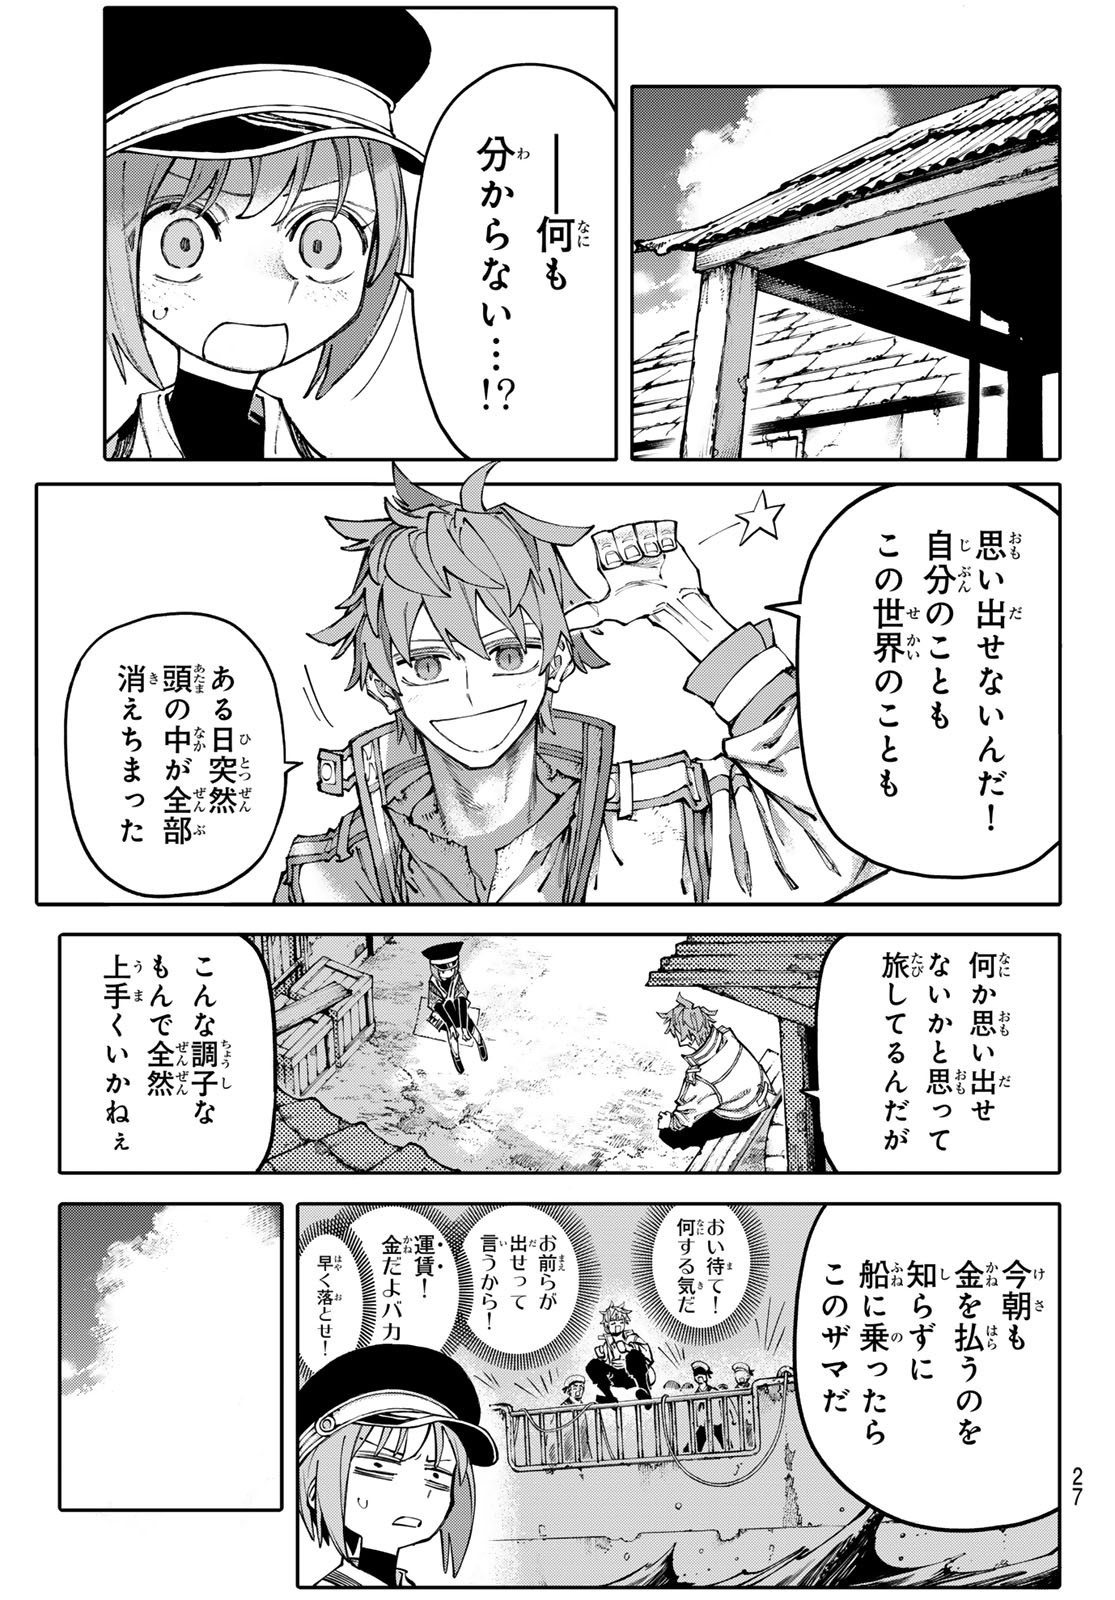 Weekly Shōnen Magazine - 週刊少年マガジン - Chapter 2024-33 - Page 25